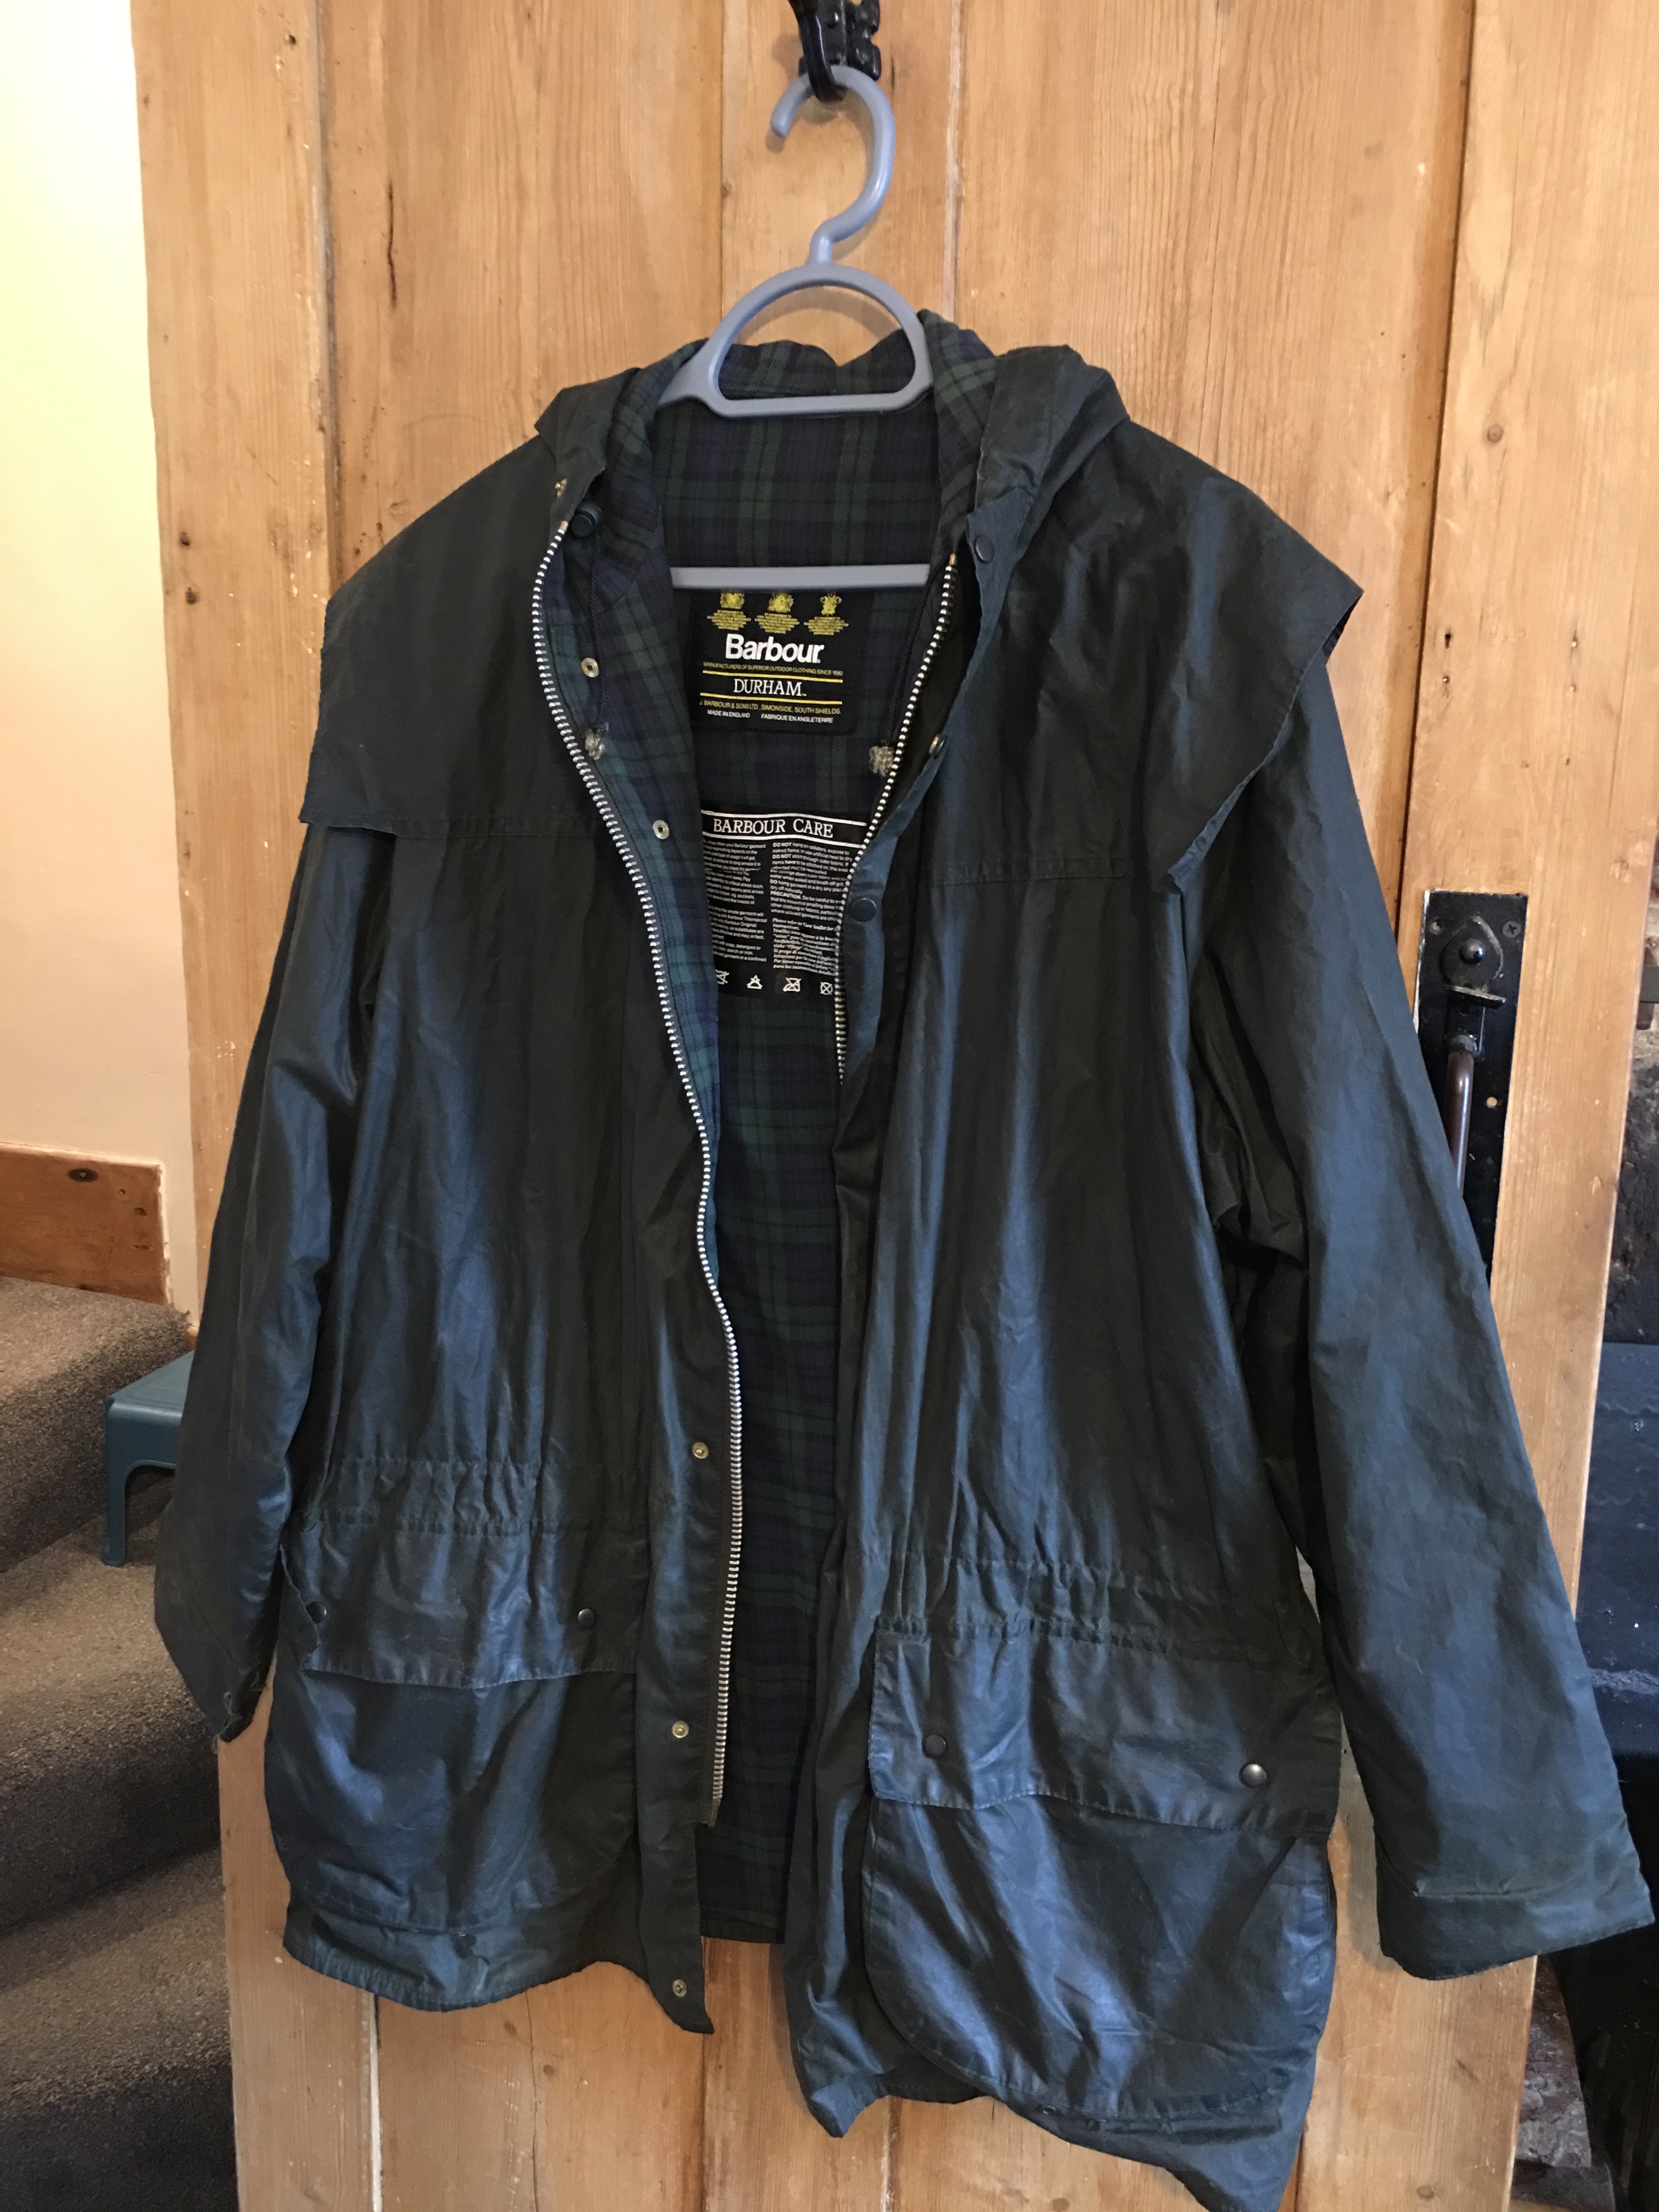 where to buy barbour jackets near me